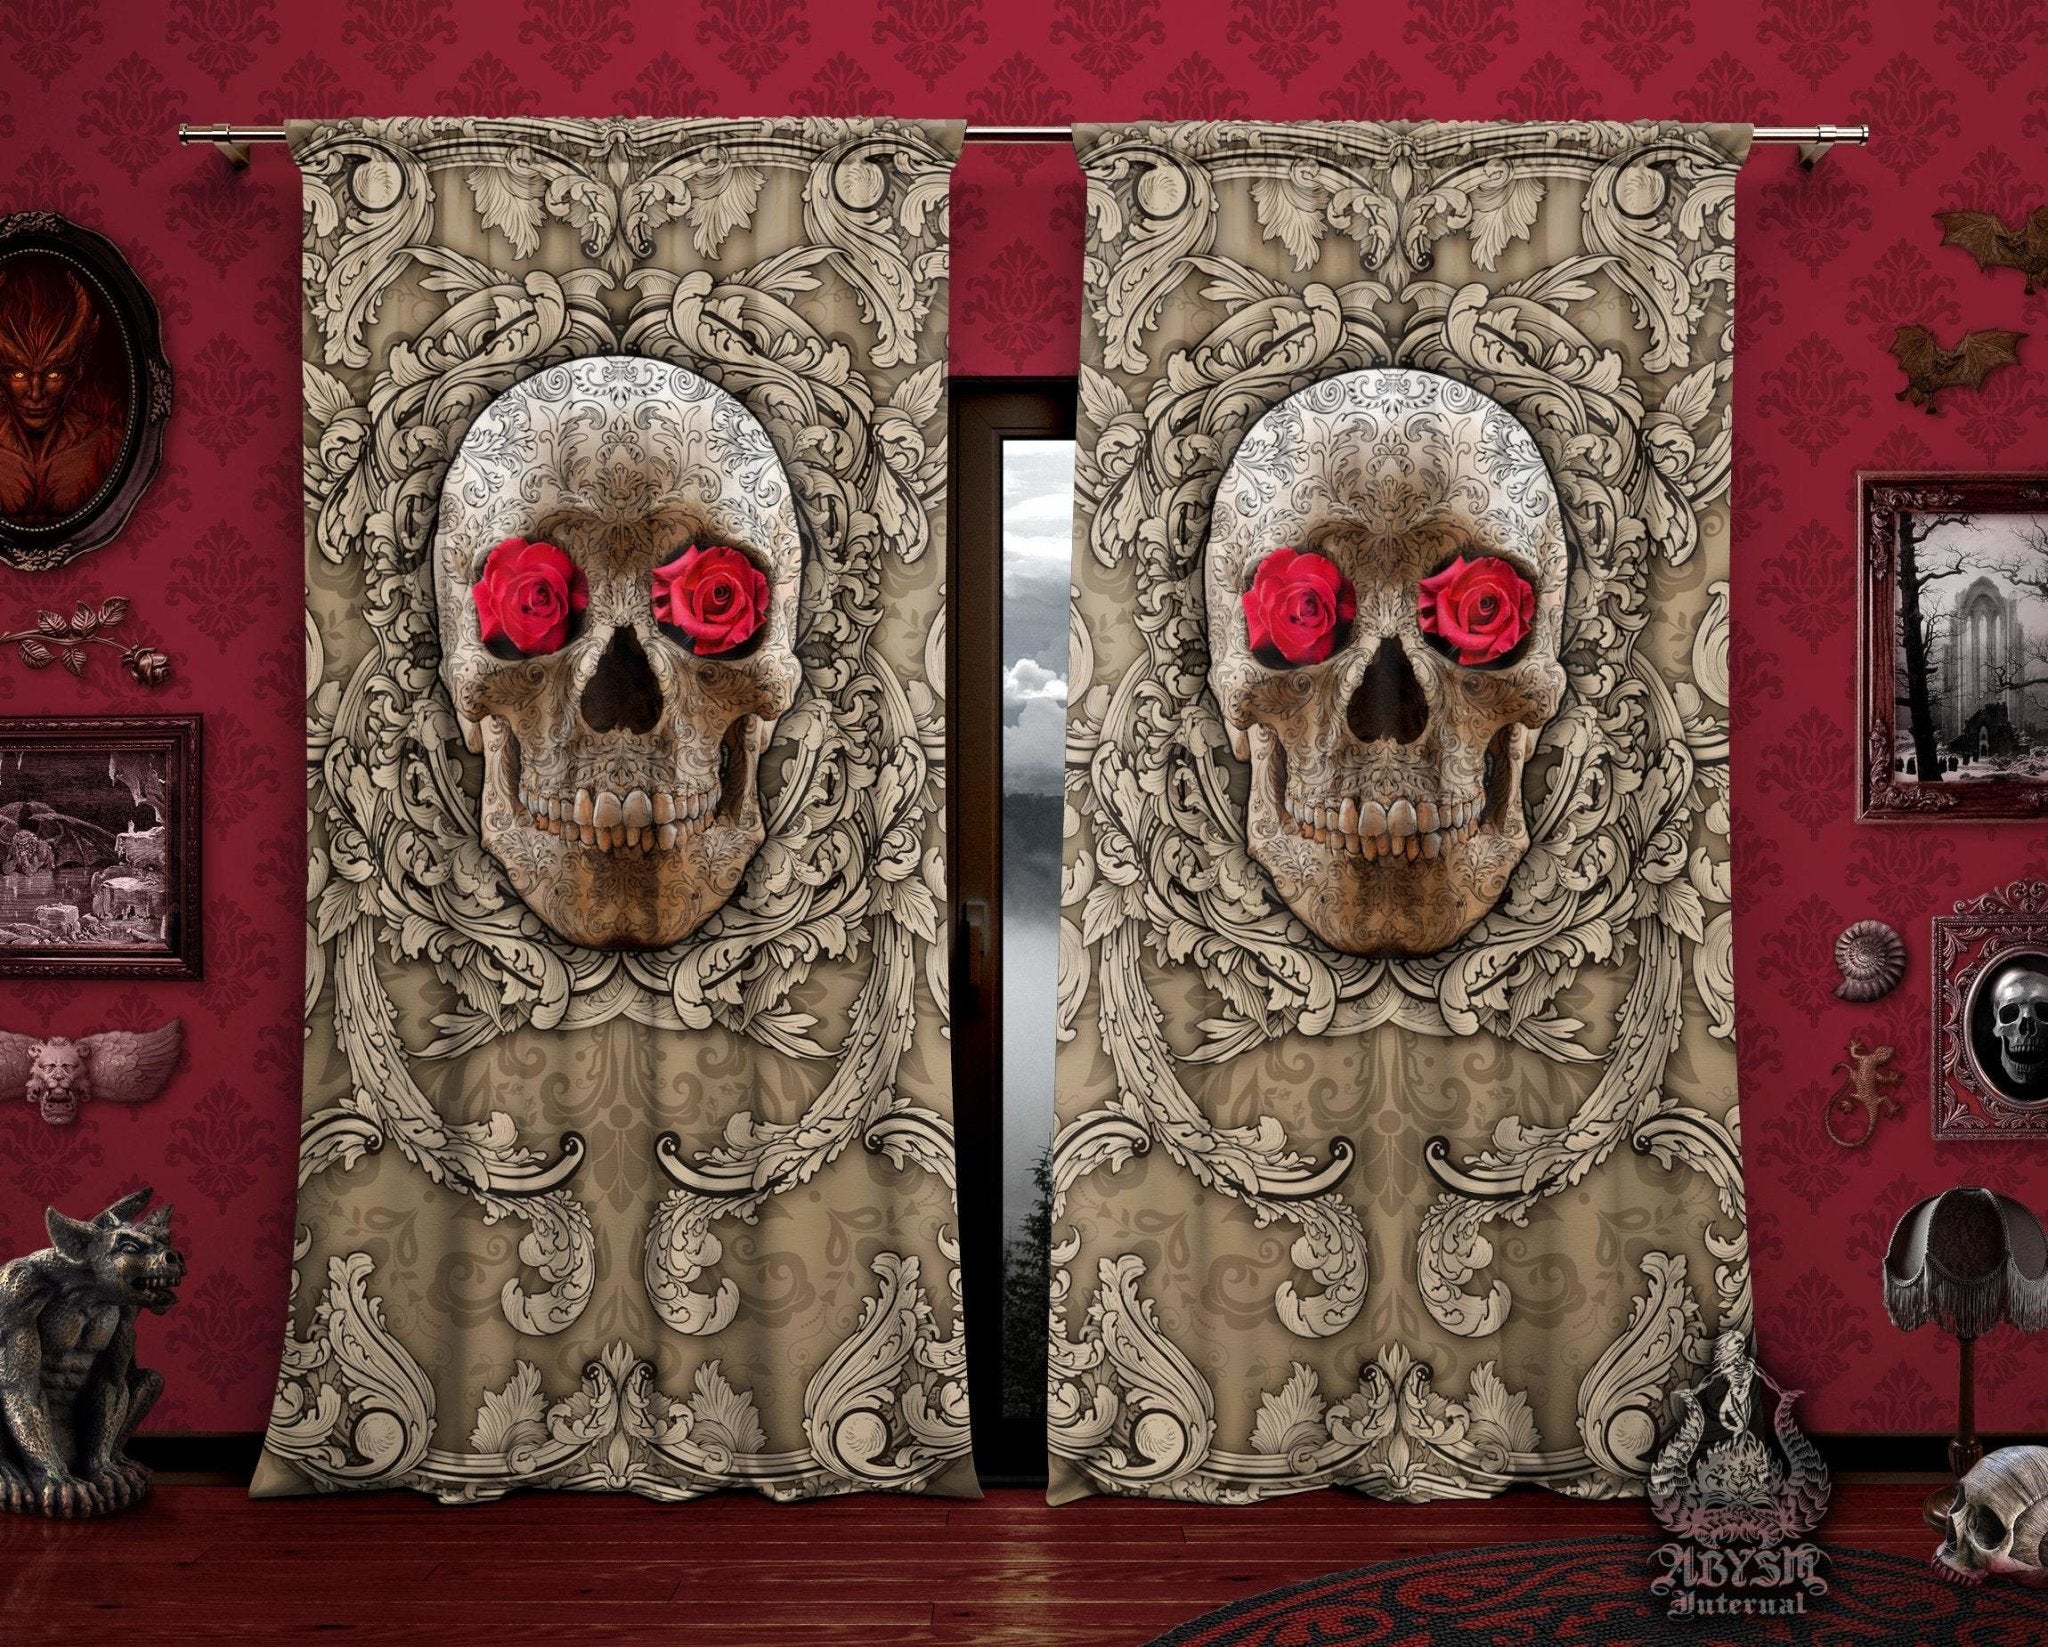 Skull Blackout Curtains, Long Window Panels, Macabre Art Print, Goth Home Decor - Cream, Red Roses - Abysm Internal